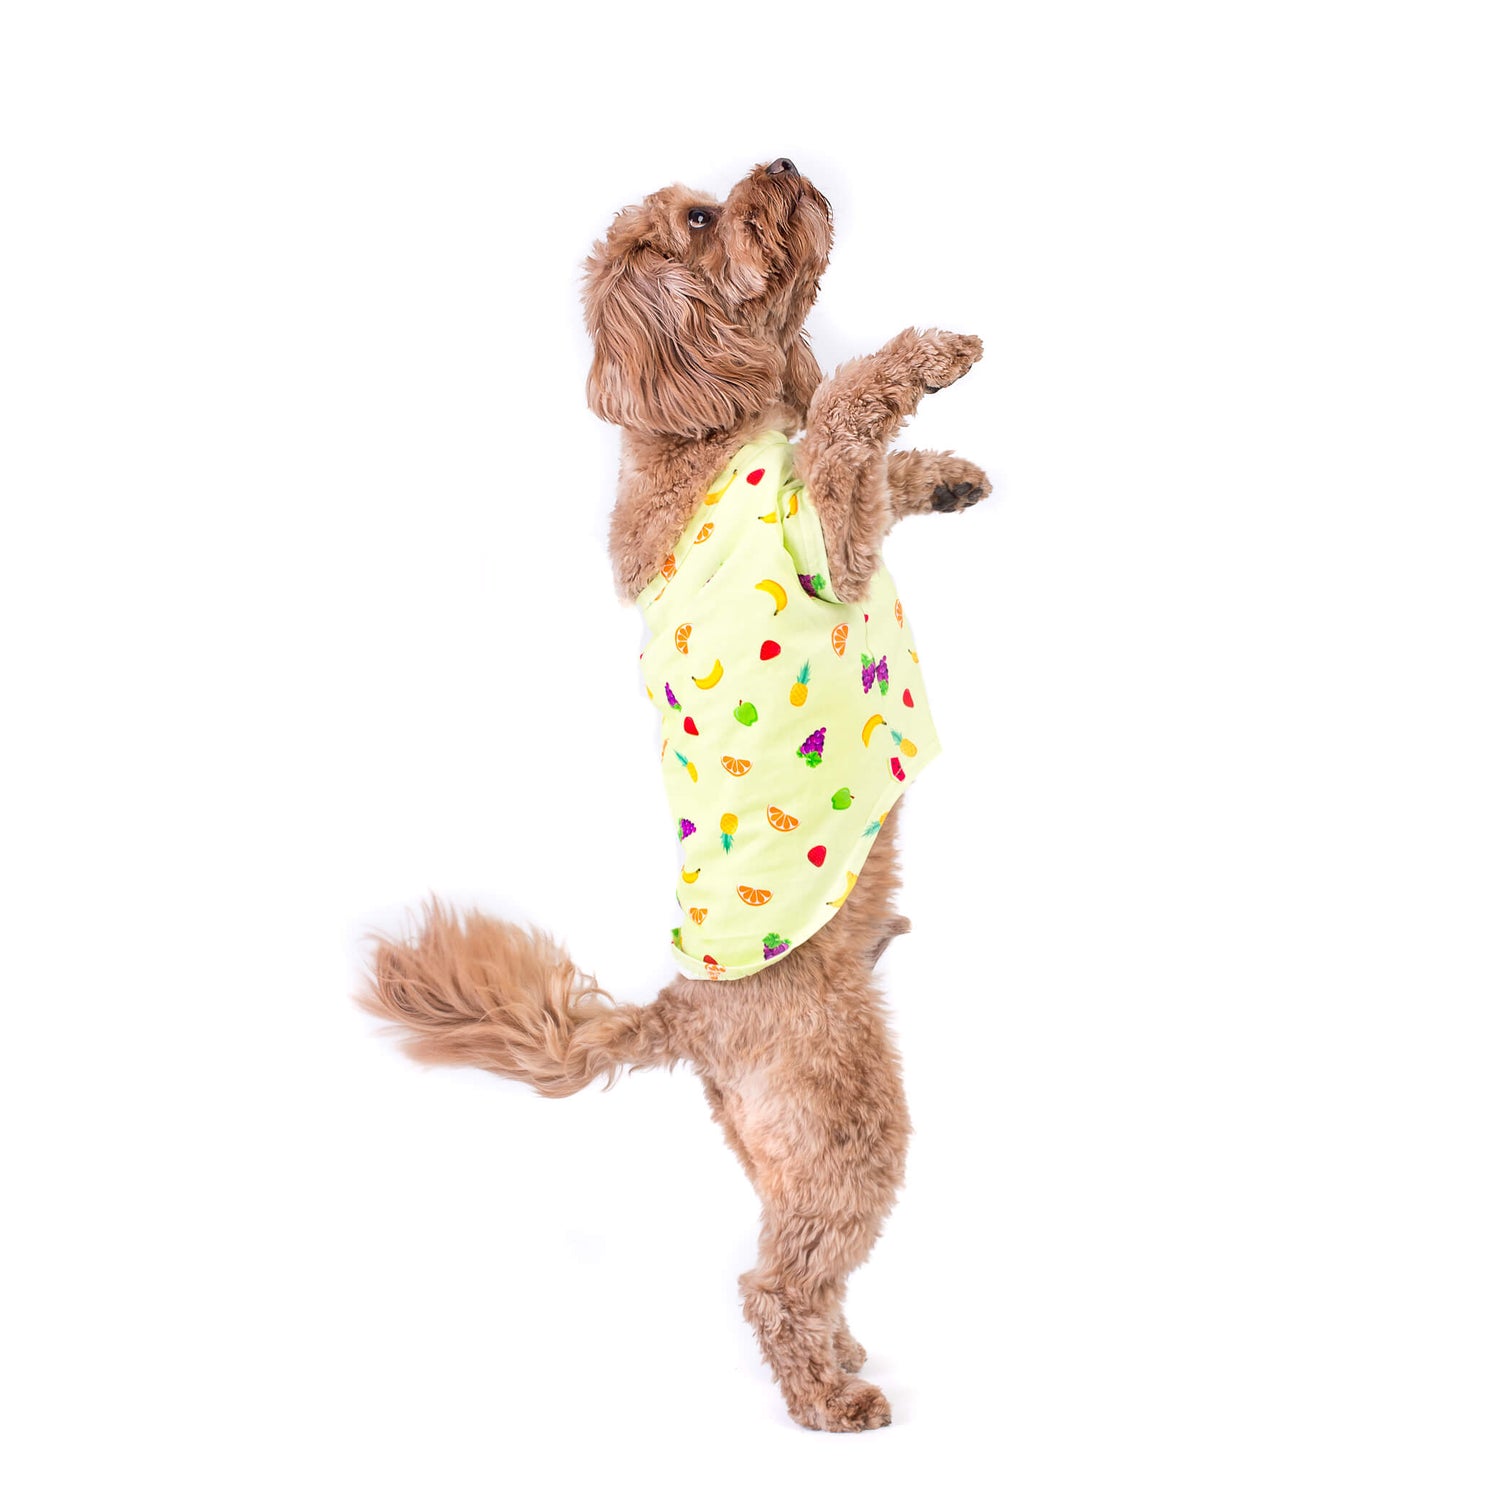 Energetic Cavoodle displaying their playful spirit while standing on hind legs, proudly wearing a Feelin'Fruity dog shirt that adds a touch of charm and vibrancy to their adorable pose.